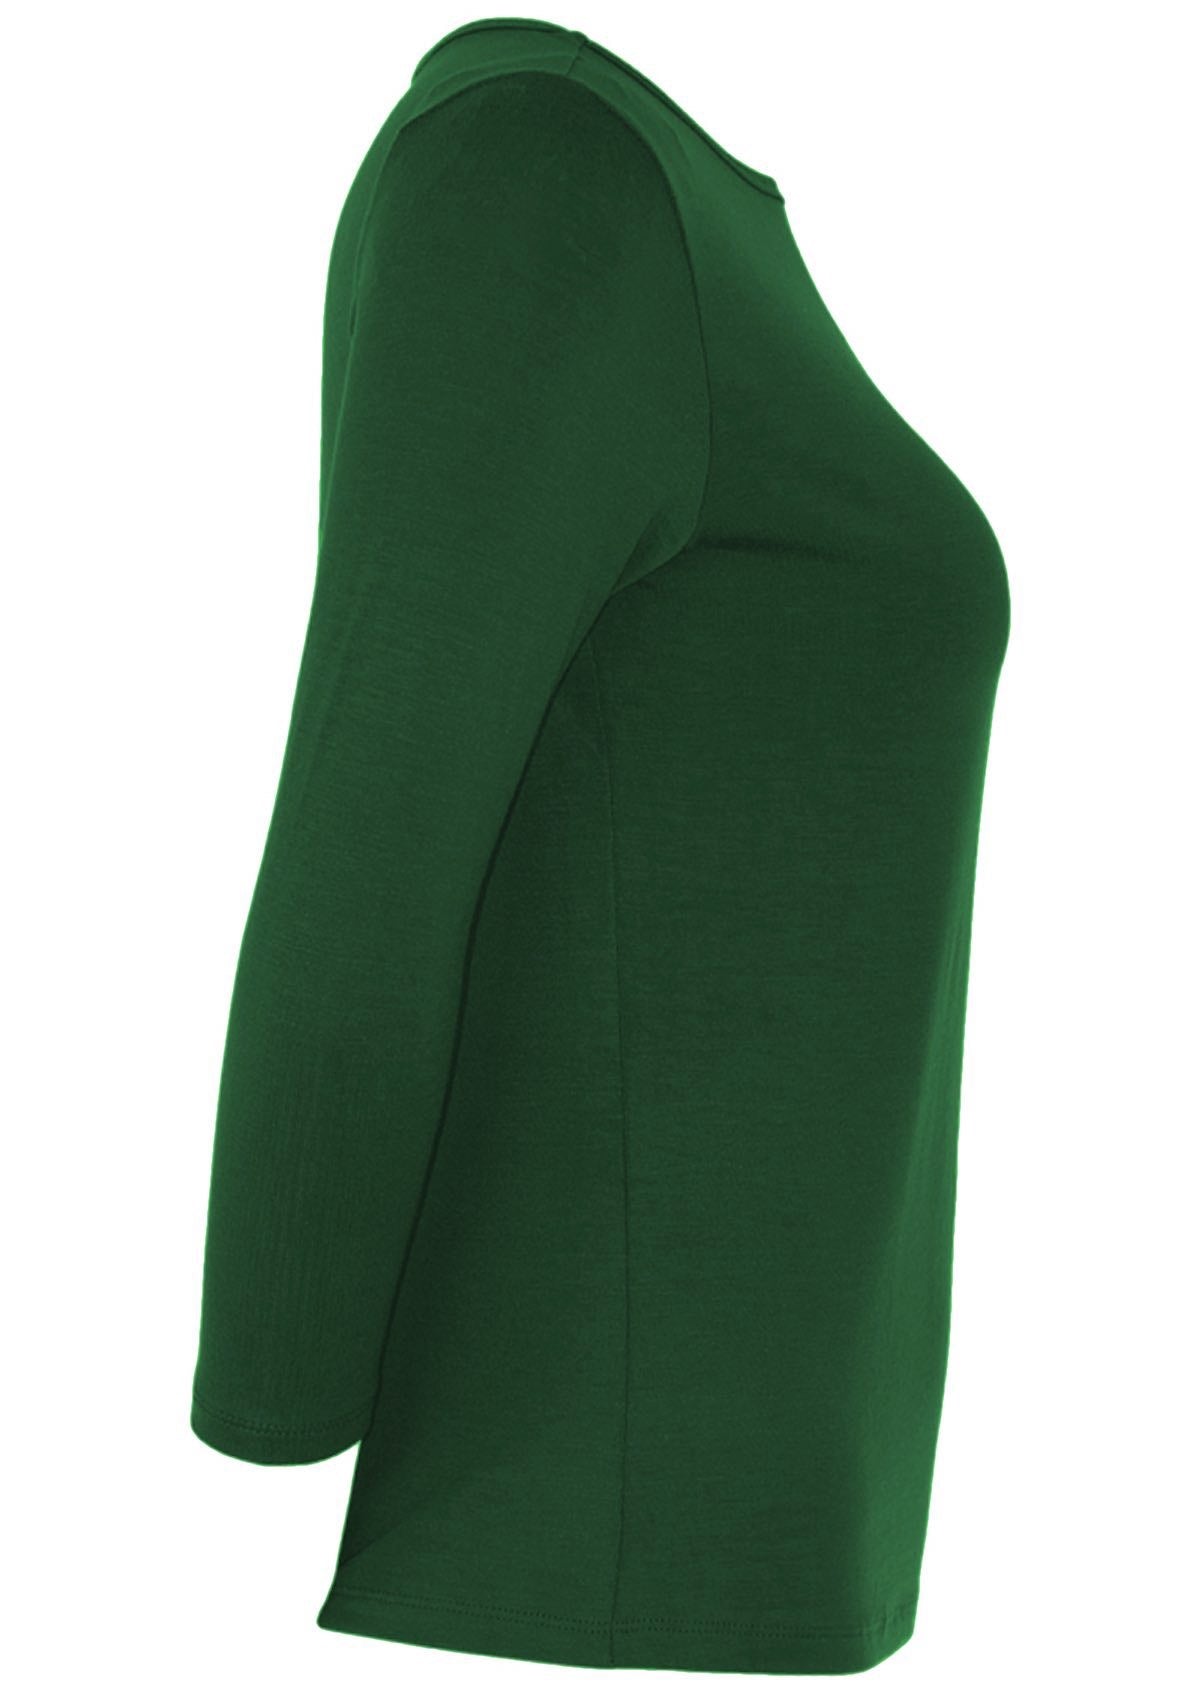 Side view of women's rayon boat neck green 3/4 sleeve top.